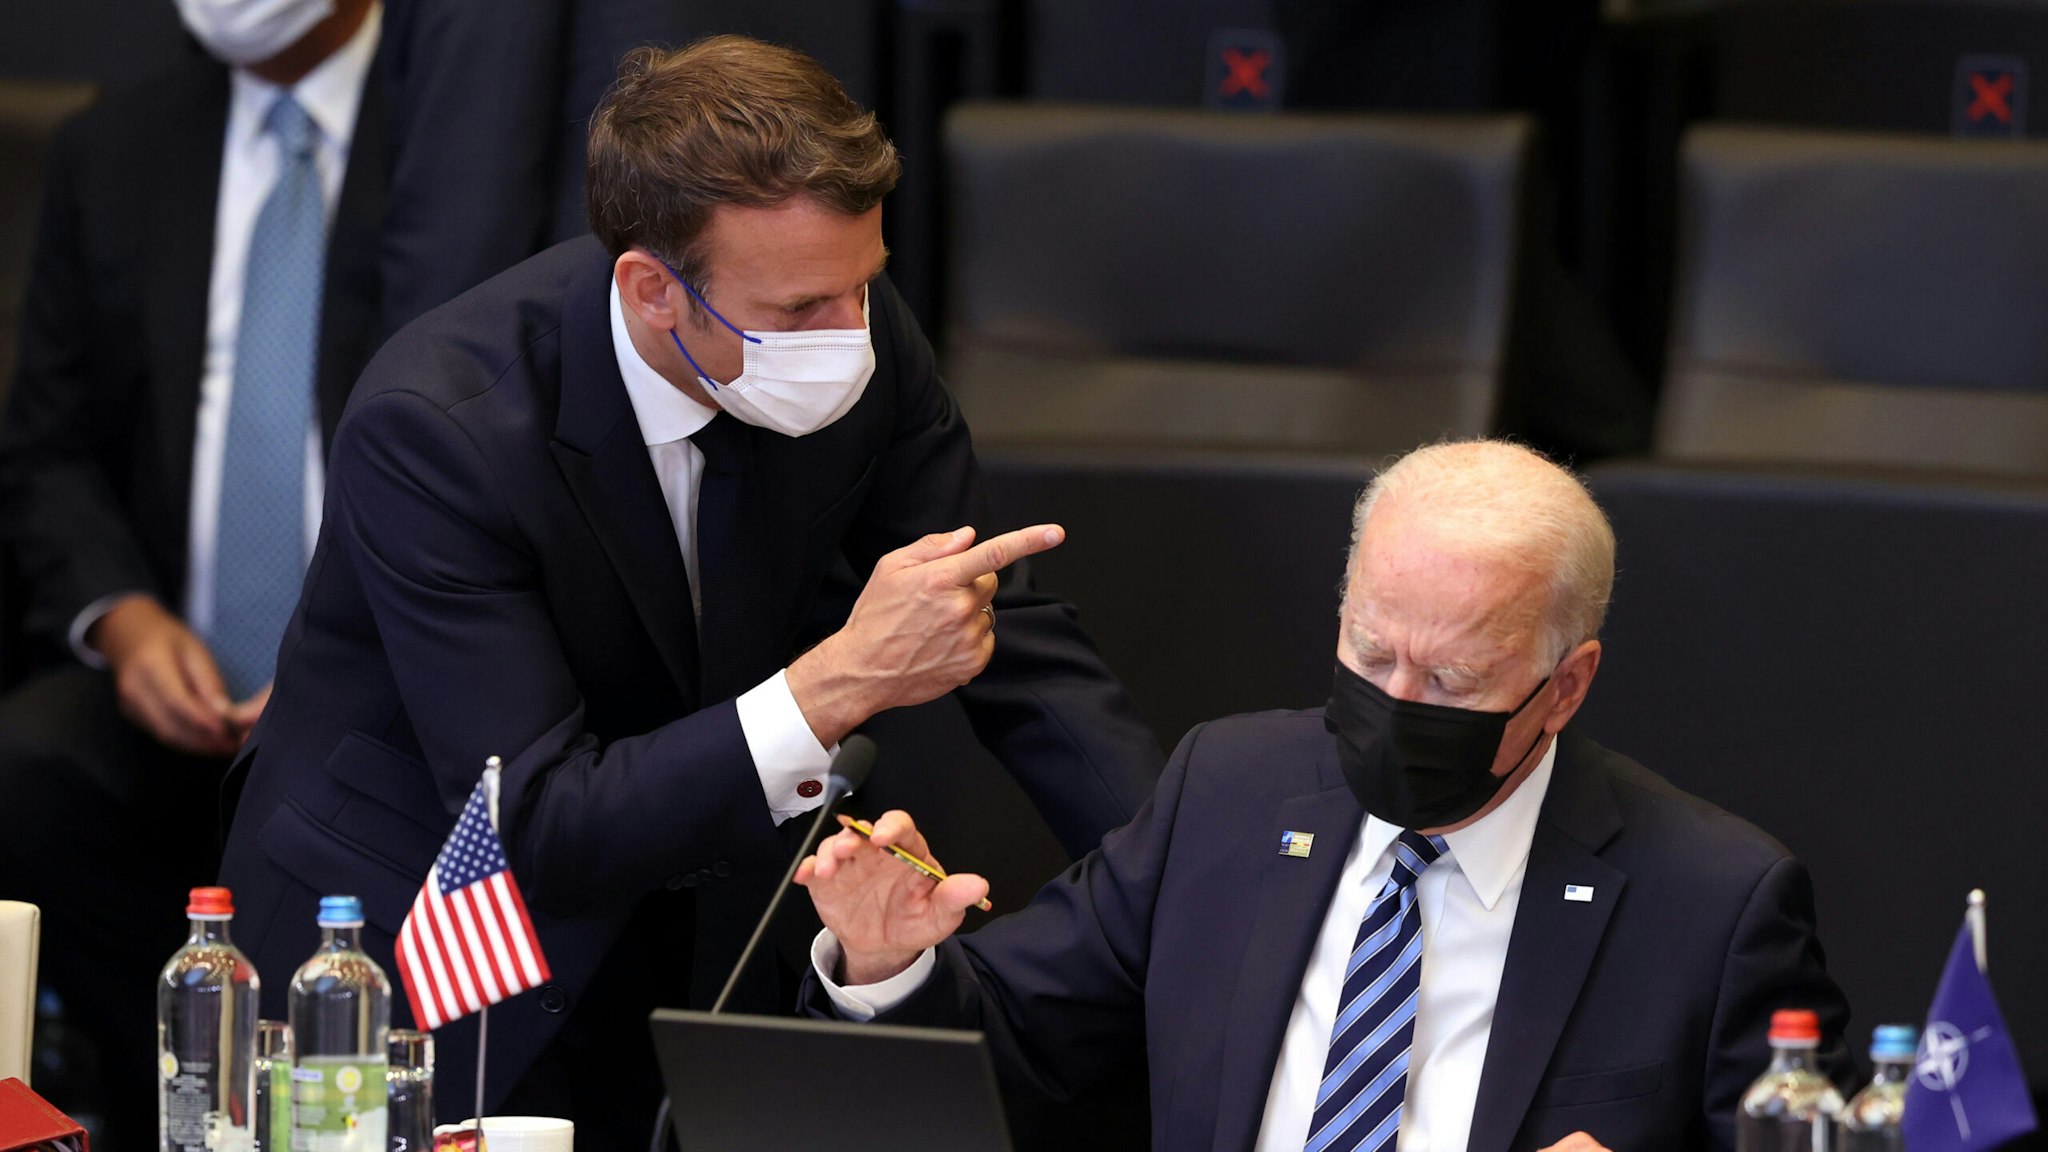 BRUSSELS, BELGIUM - JUNE 14: US President Joe Biden (R) and French President Emmanuel Macron (L) have a conversation ahead of the NATO summit at the North Atlantic Treaty Organization (NATO) headquarters in Brussels, on June 14, 2021.